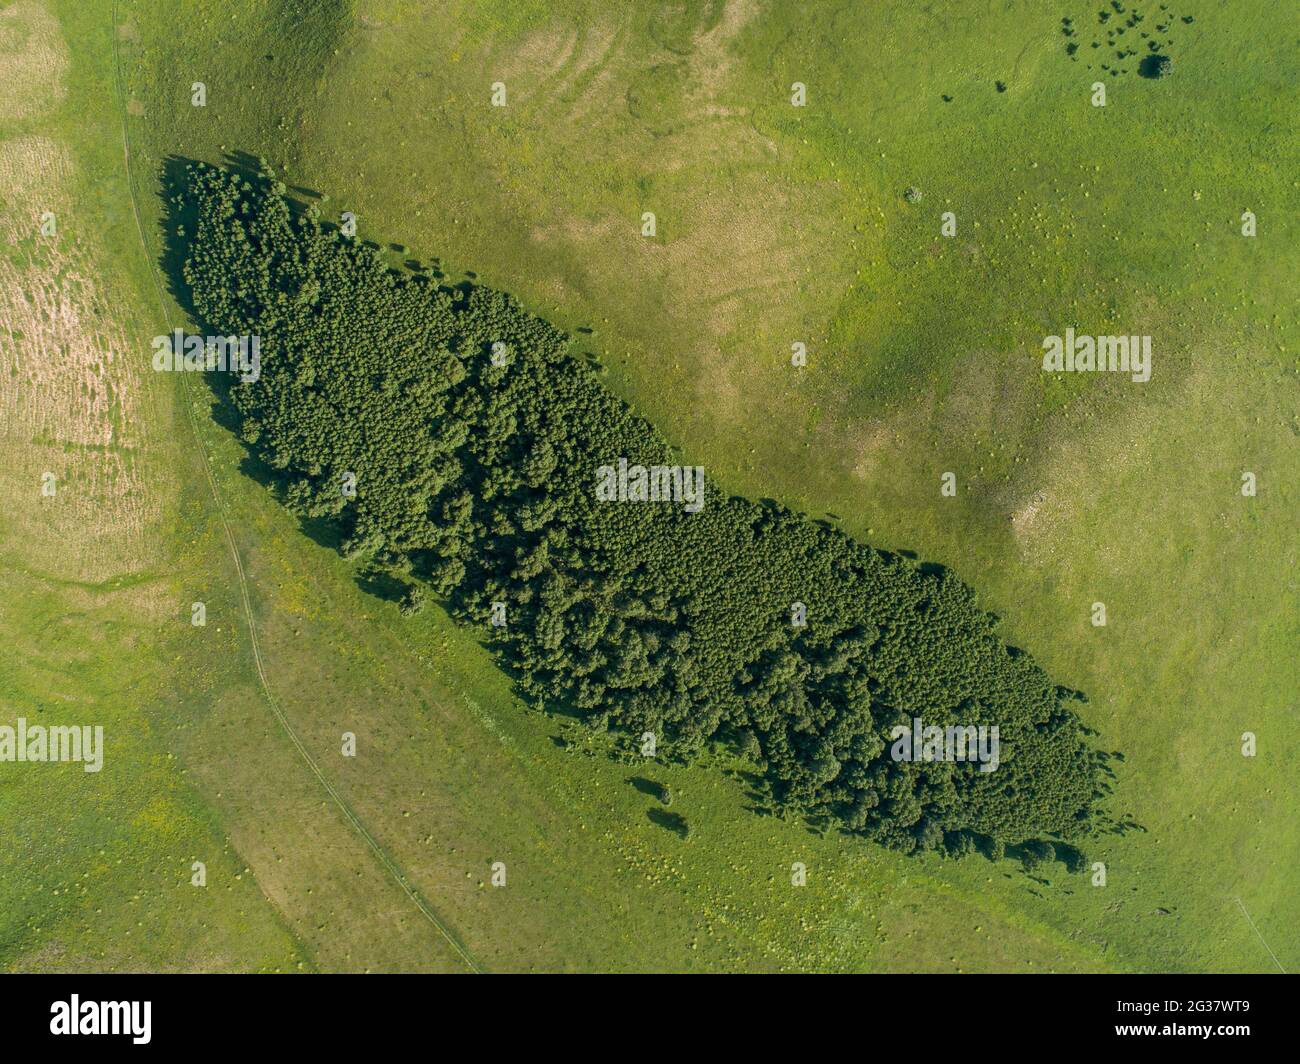 grassland in aerial view Stock Photo